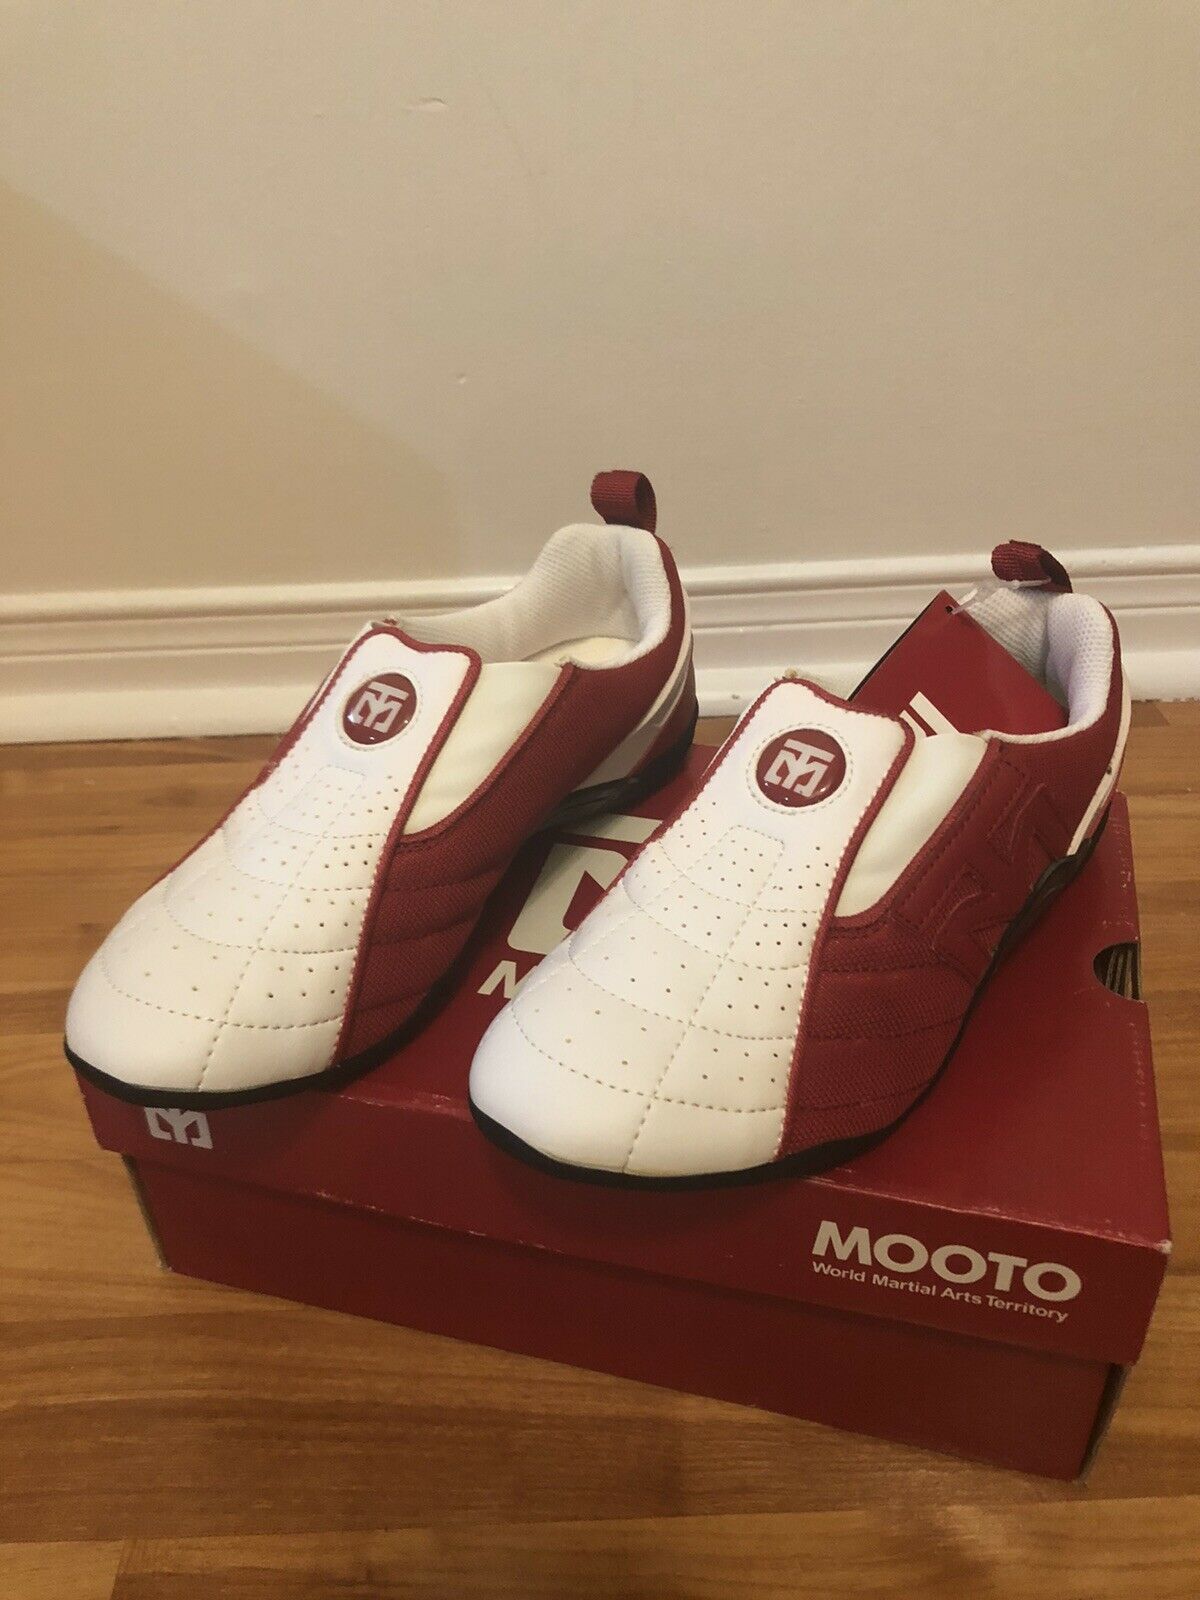 MOOTO Youth Leopard Martial Arts Taekwondo Shoes White/red Size 4.5.